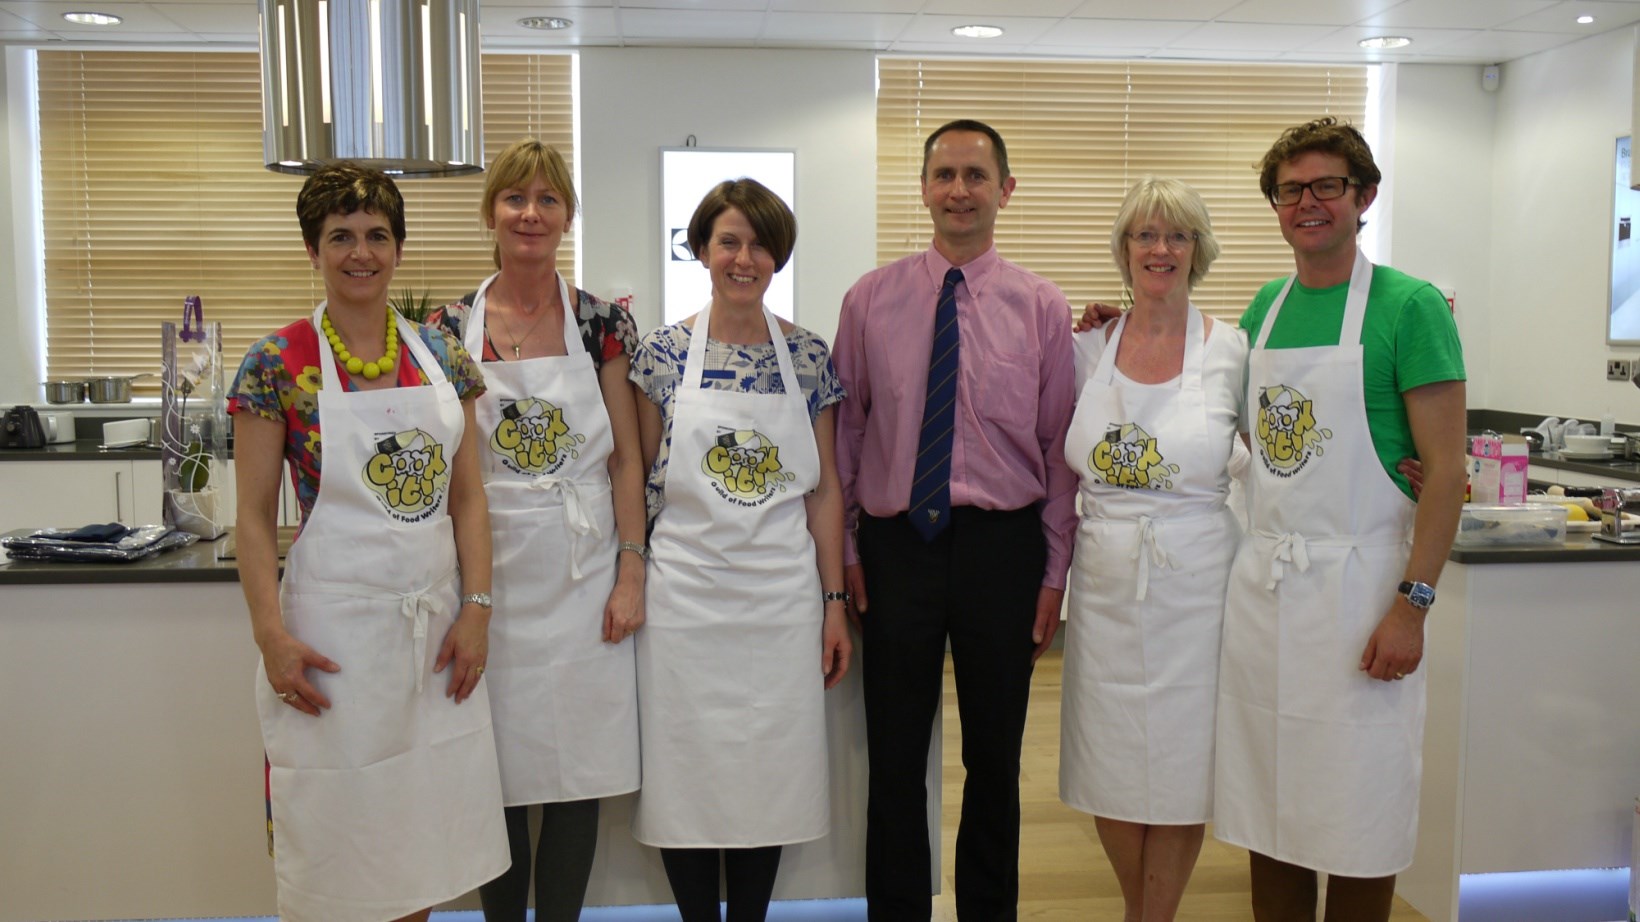 From left to right: Kate Morris, Nicola Graimes, Jayne Cross, Andrew Payling, Jane Suthering and Stefan Gates